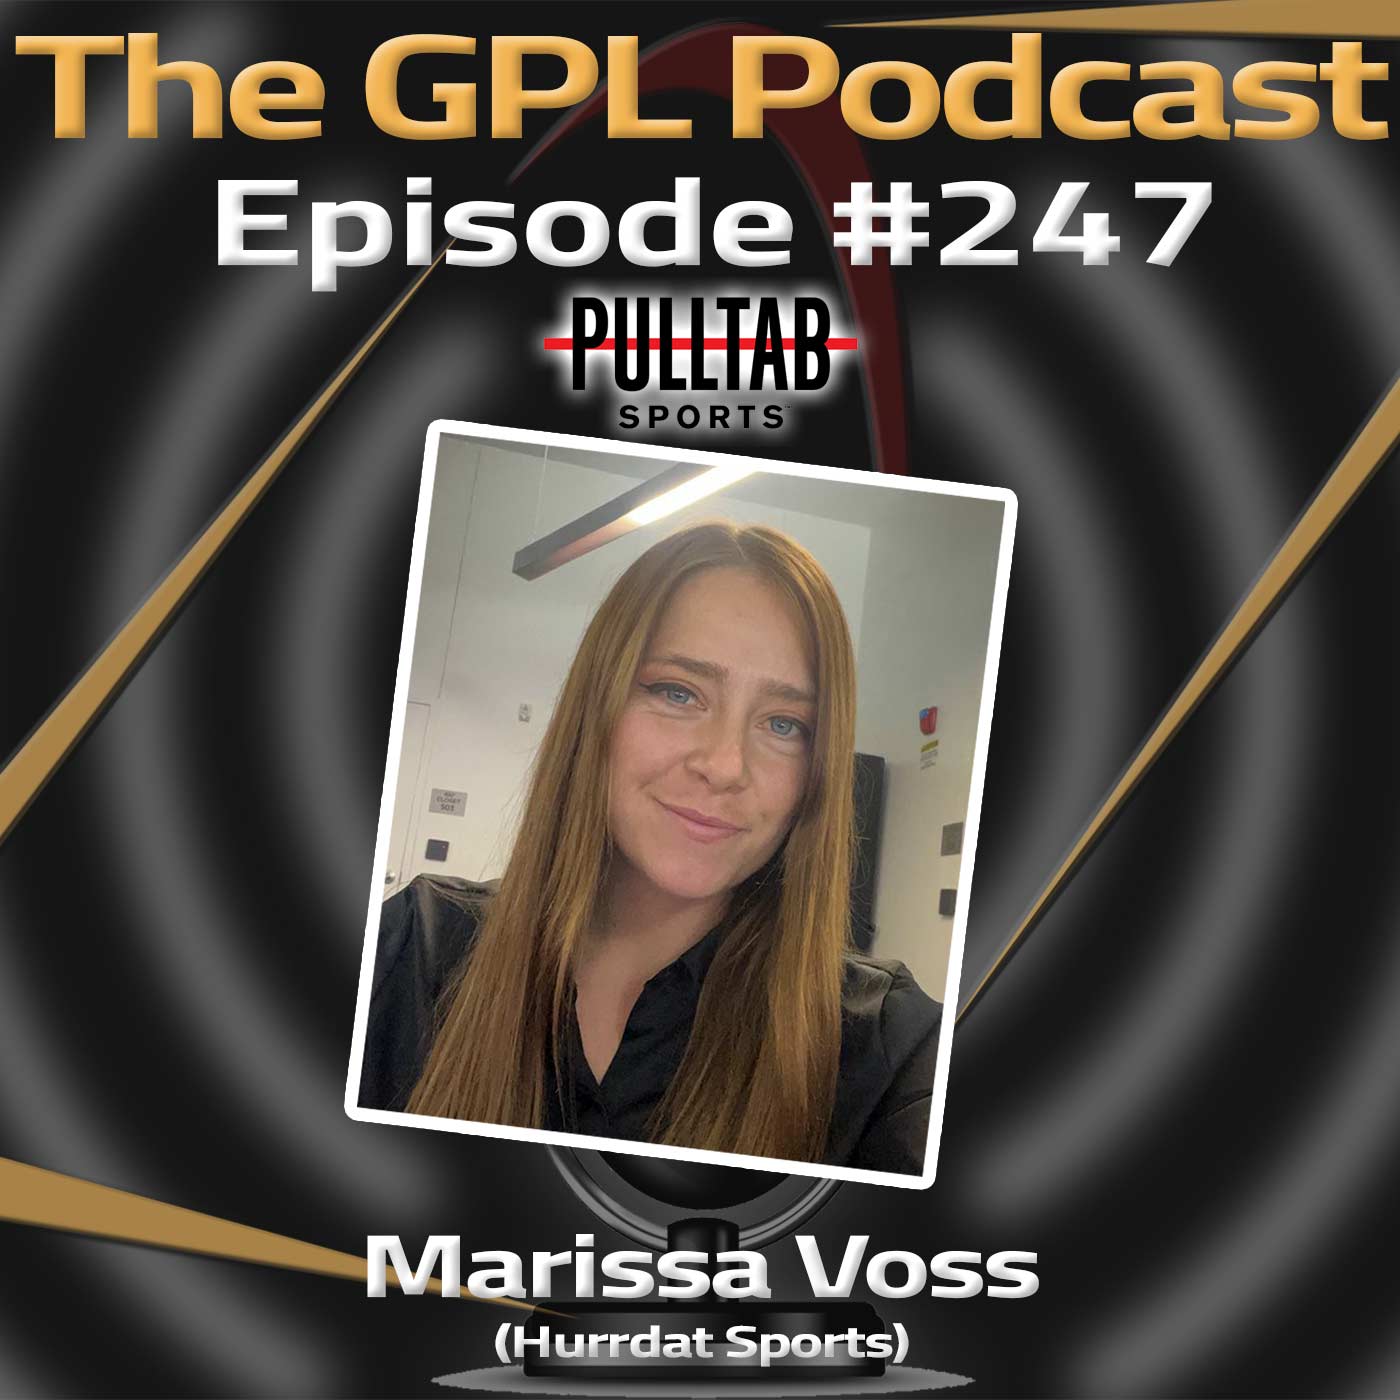 GPL Podcast #247: Marissa Voss joins the show